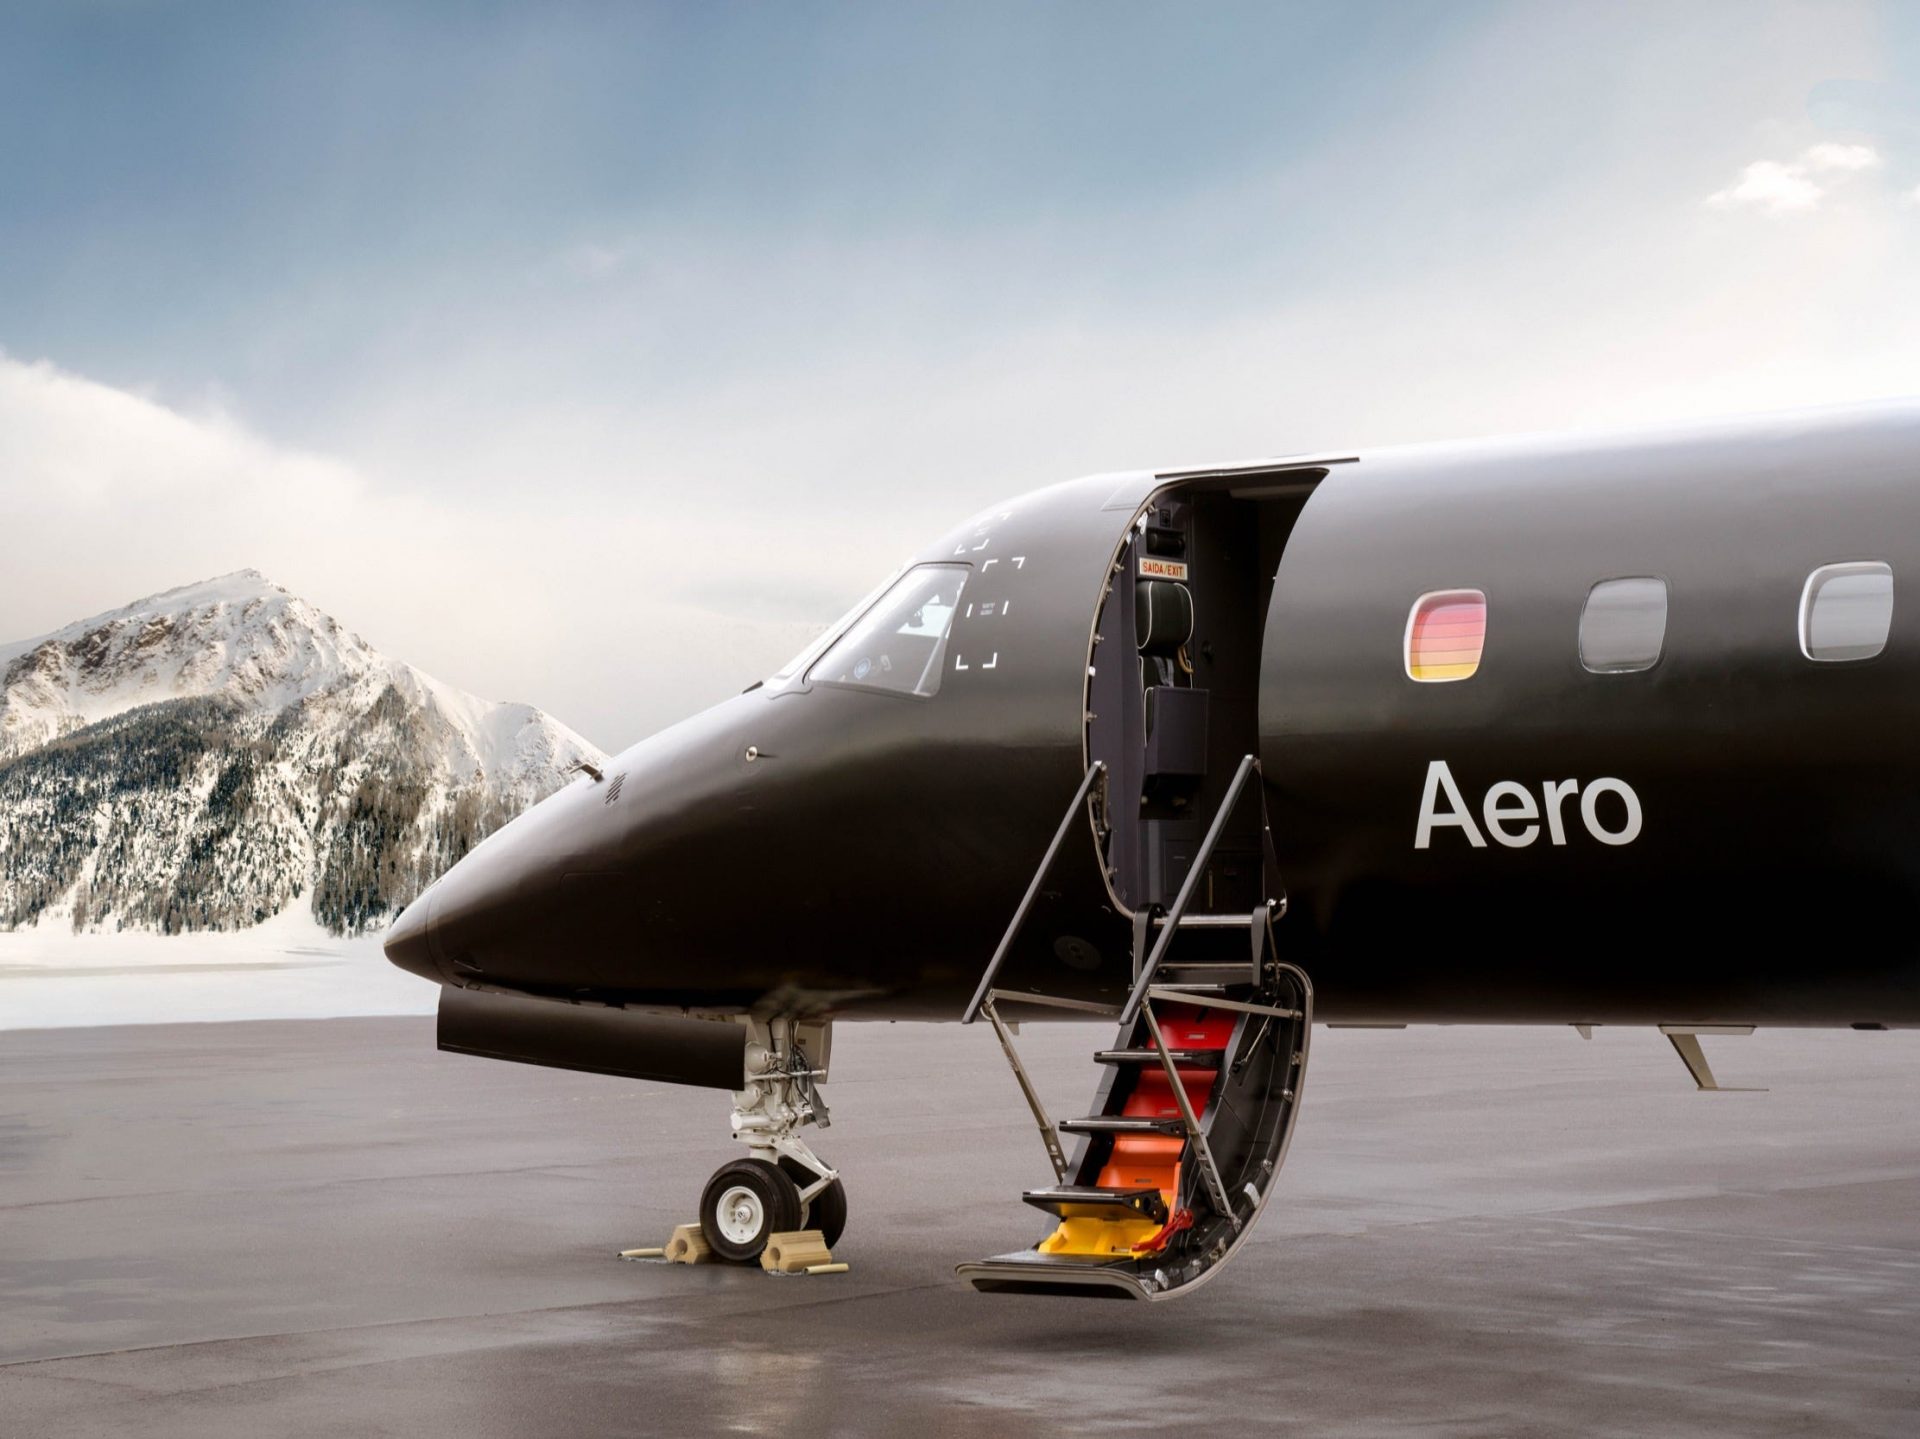 A brand original startup luxury airline is launching flights next month with a non-public jet-esteem plane — right here’s a more in-depth scrutinize at Aero